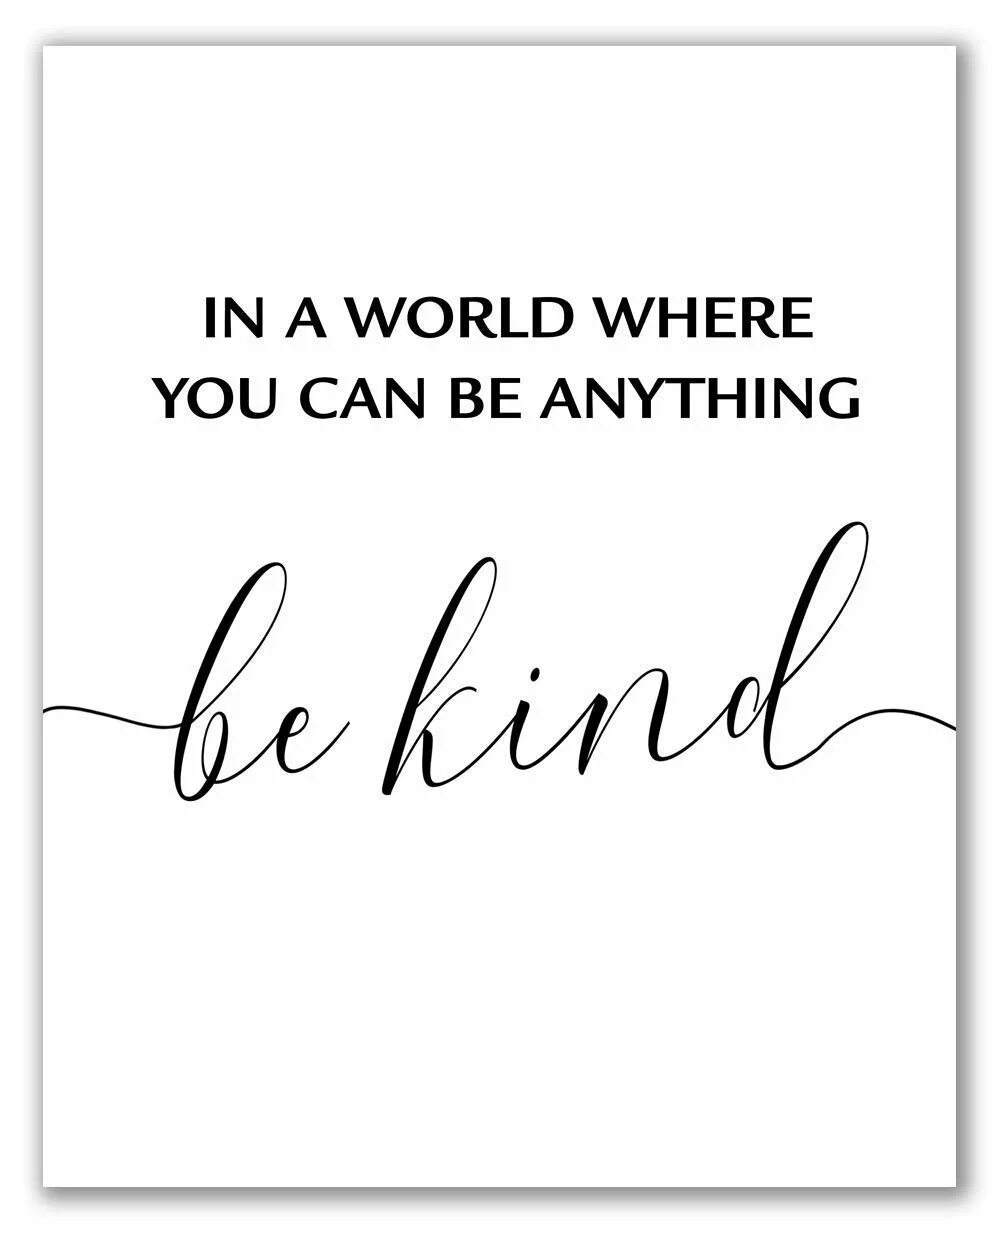 Be kind to the world. In a World where you can be anything be kind. Be kind картинка. You can be anything. You could be.